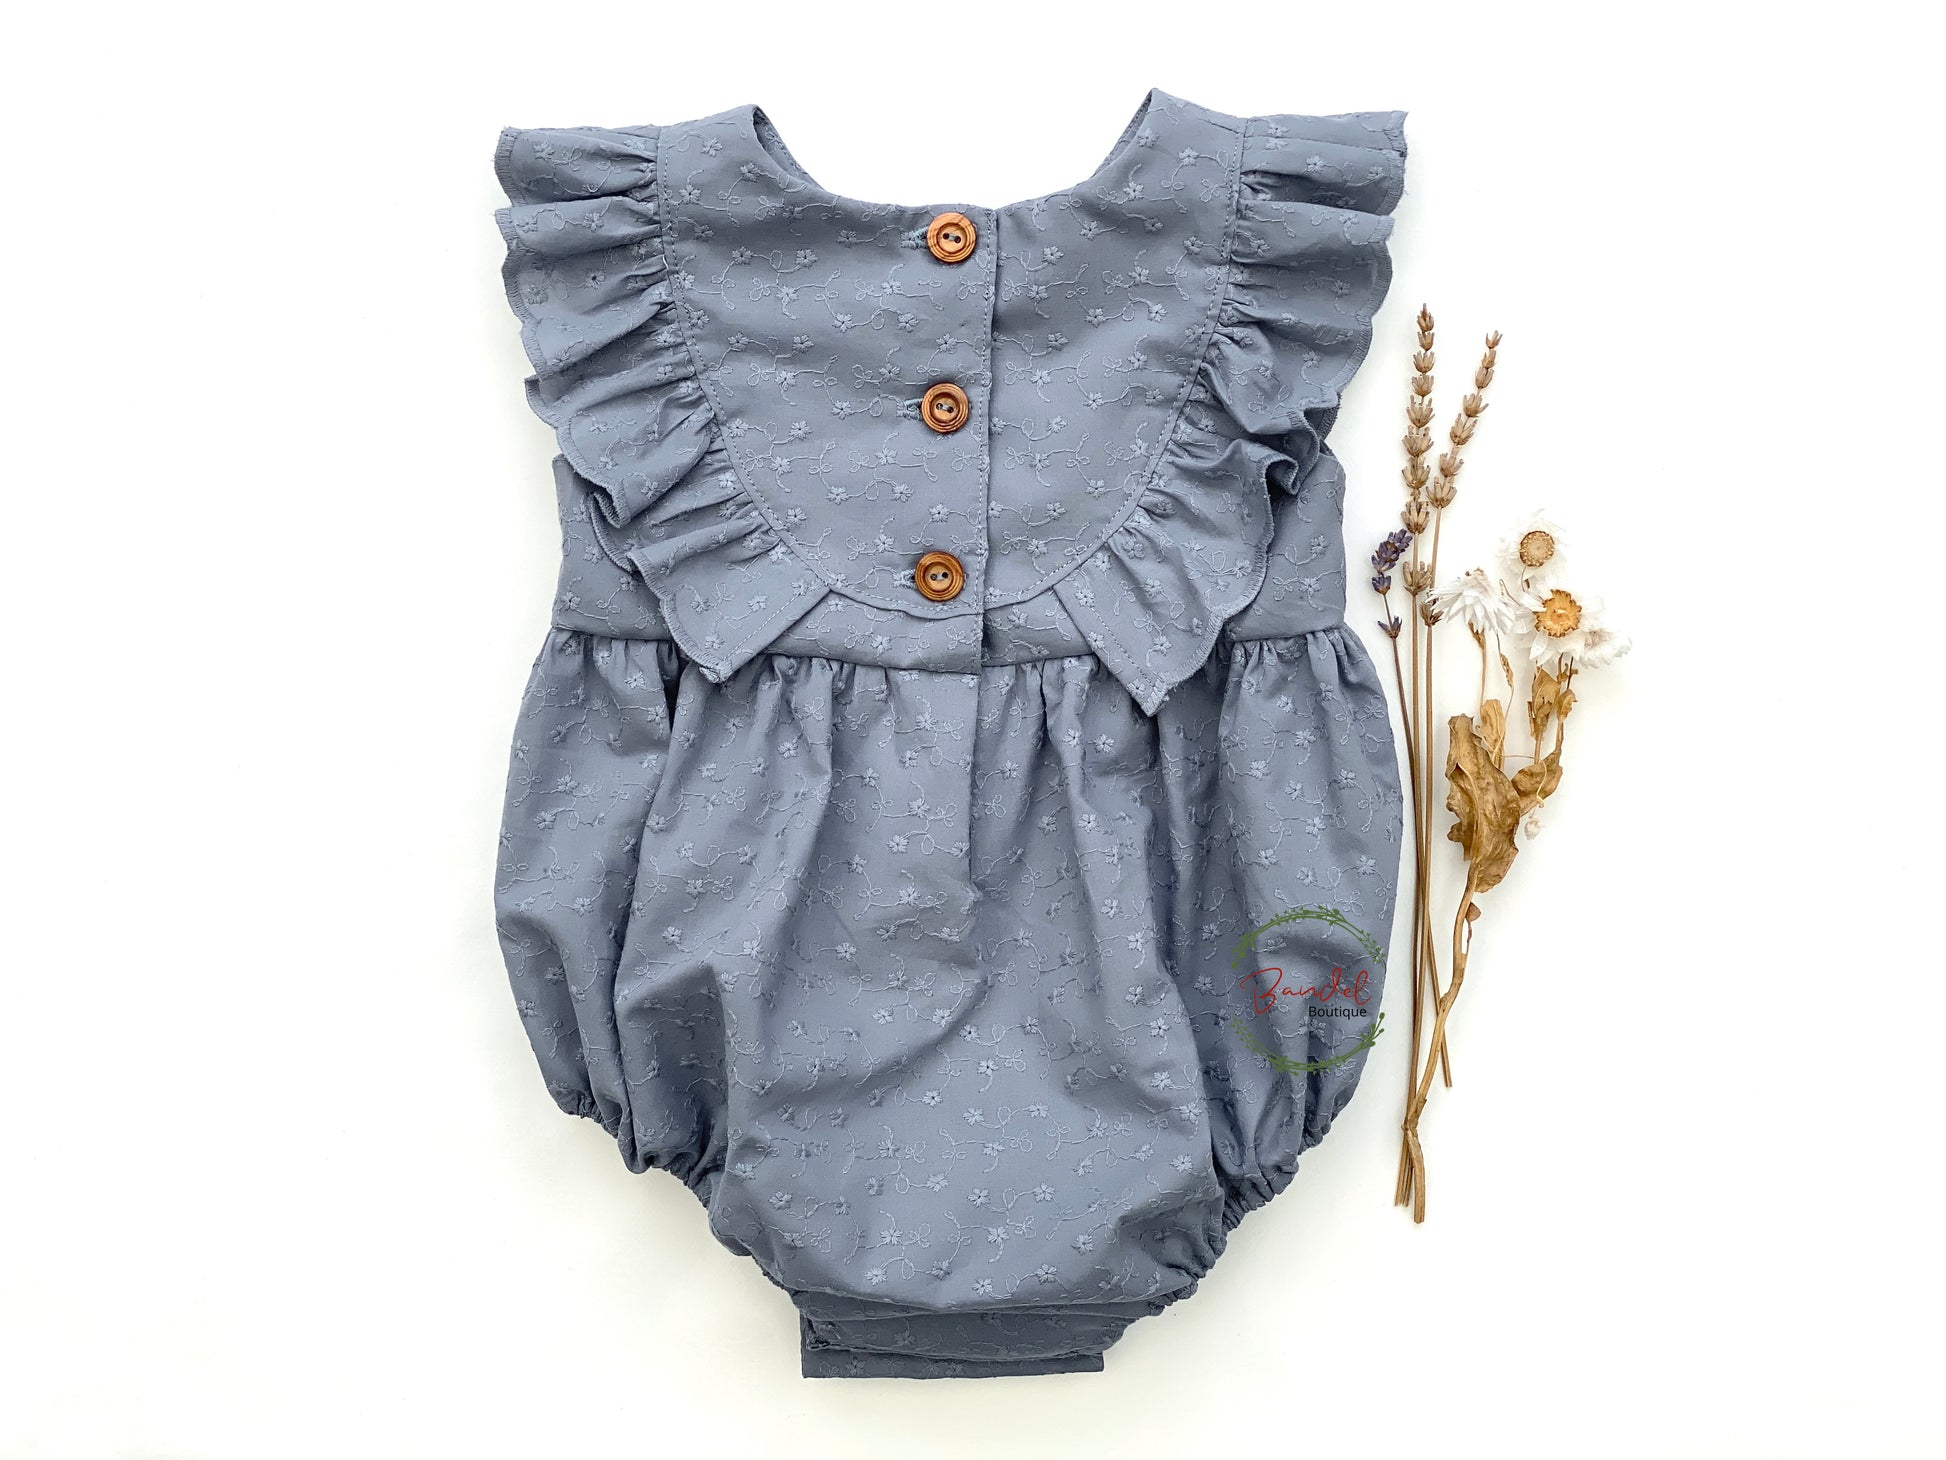 Dusty-Blue Romper is a perfect staple piece for any baby girl's wardrobe. Crafted with soft, breathable fabric, this romper features a delicate embroidery design and a ruffled front bodice. It also includes convenient snap closure at the crotch, making diaper changing and outfit adjustments effortless.